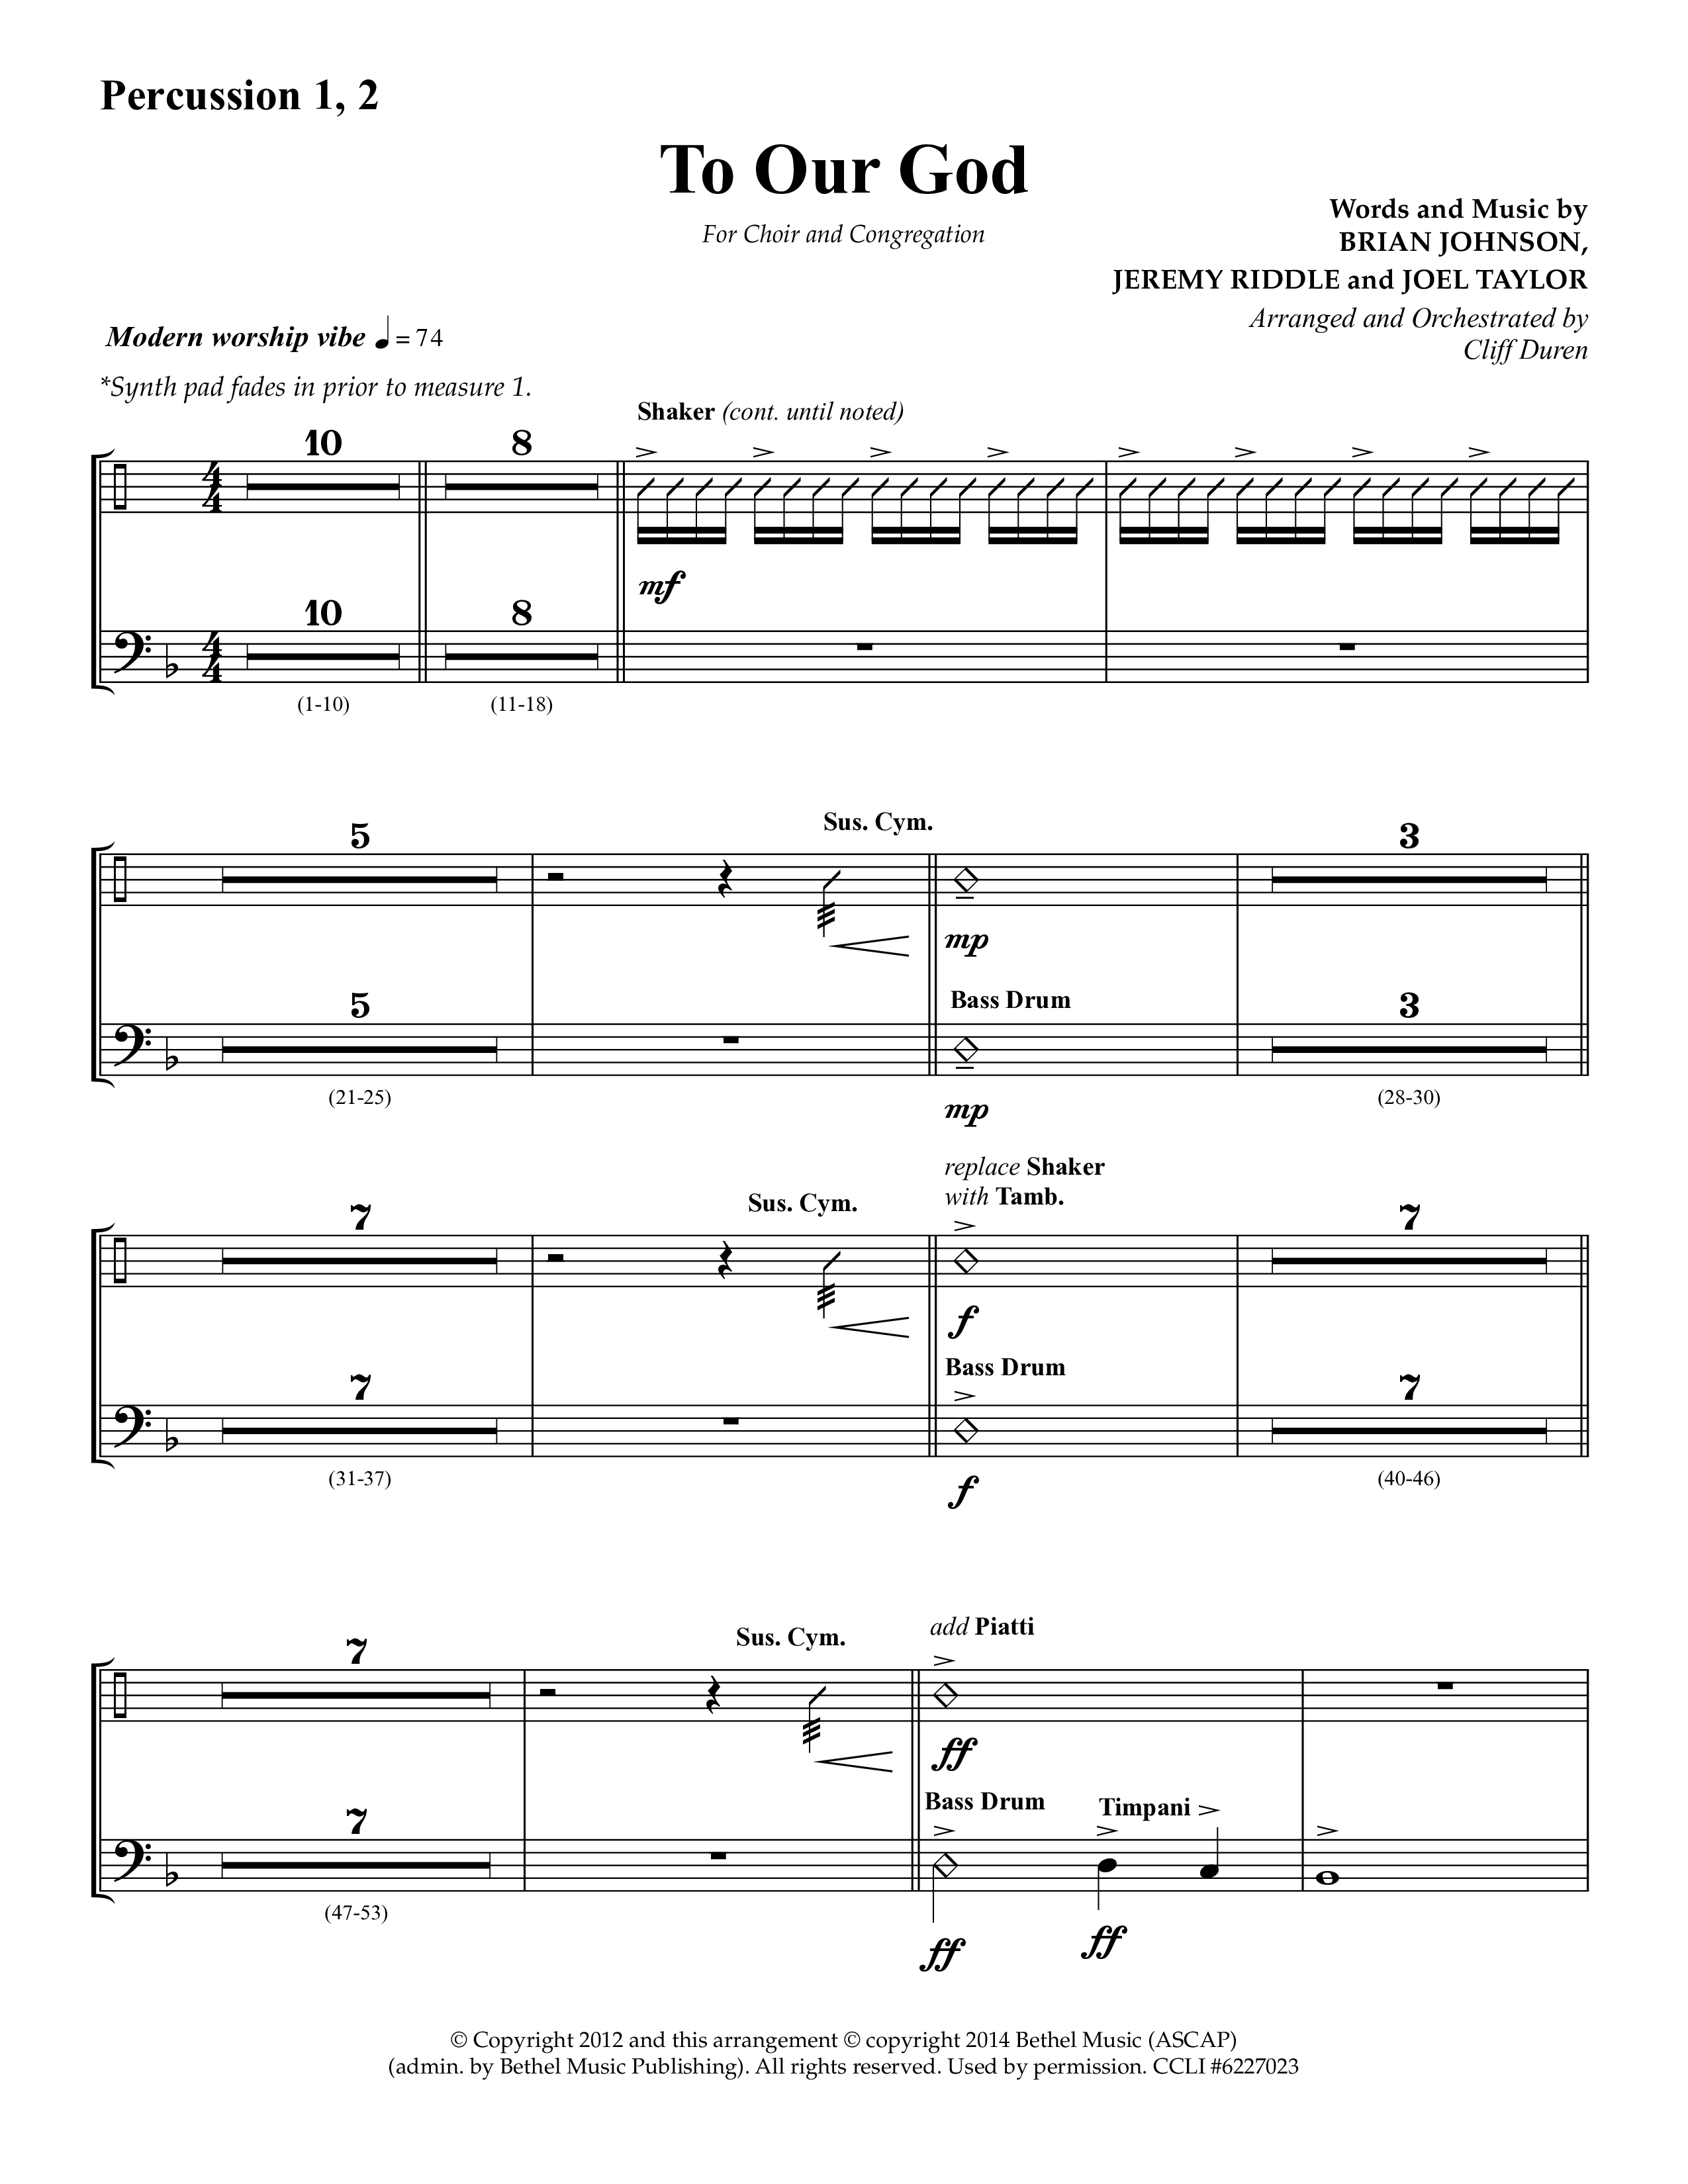 To Our God (Choral Anthem SATB) Percussion 1/2 (Lifeway Choral / Arr. Cliff Duren)